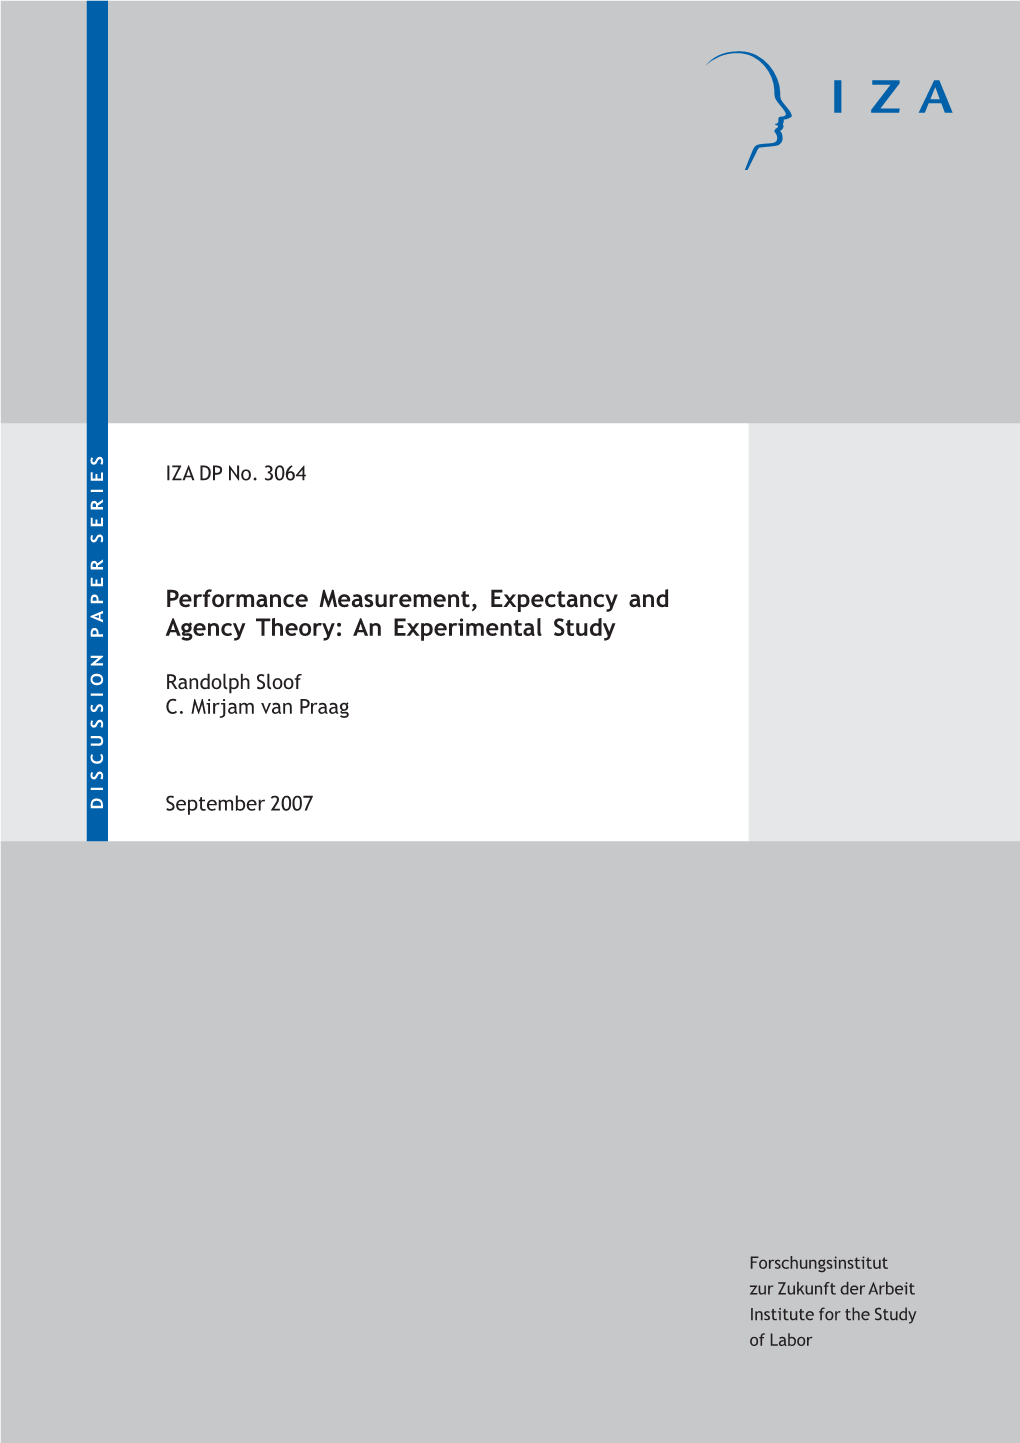 Performance Measurement, Expectancy and Agency Theory: an Experimental Study